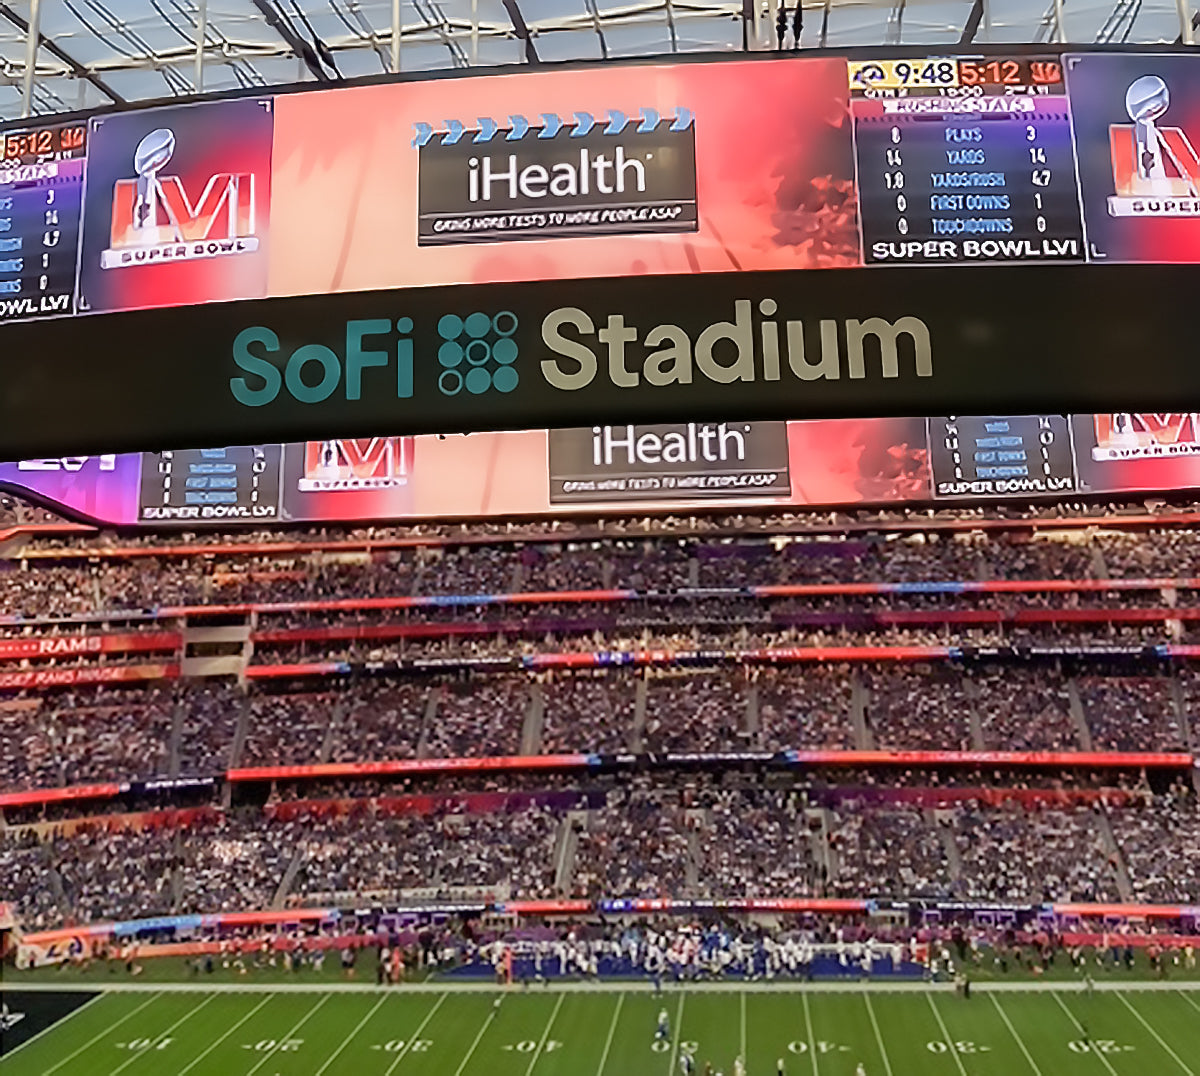 iHealth's Super Bowl Debut Highlights Its Commitment to Bring More Tests to More People ASAP